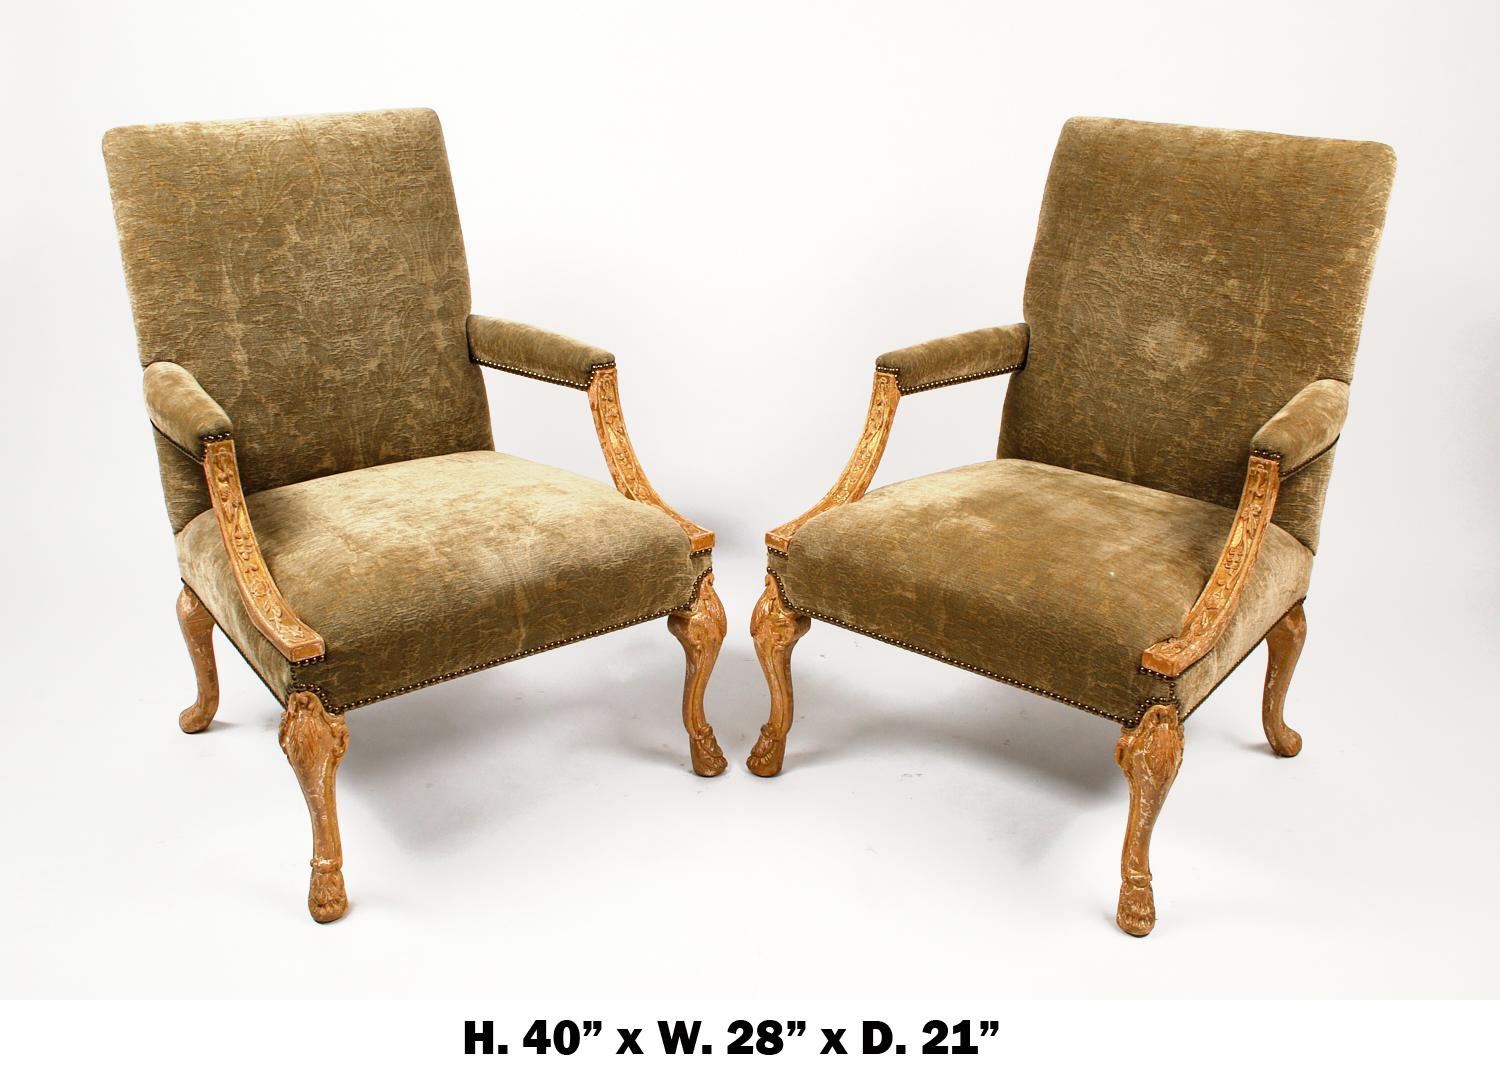 Desirable pair of English George III style library armchairs, well proportioned and upholstered.
with bleached wood finish, very comfortable.
few scattered spots of stain to upholstery.
20th century 
Measures: H.40